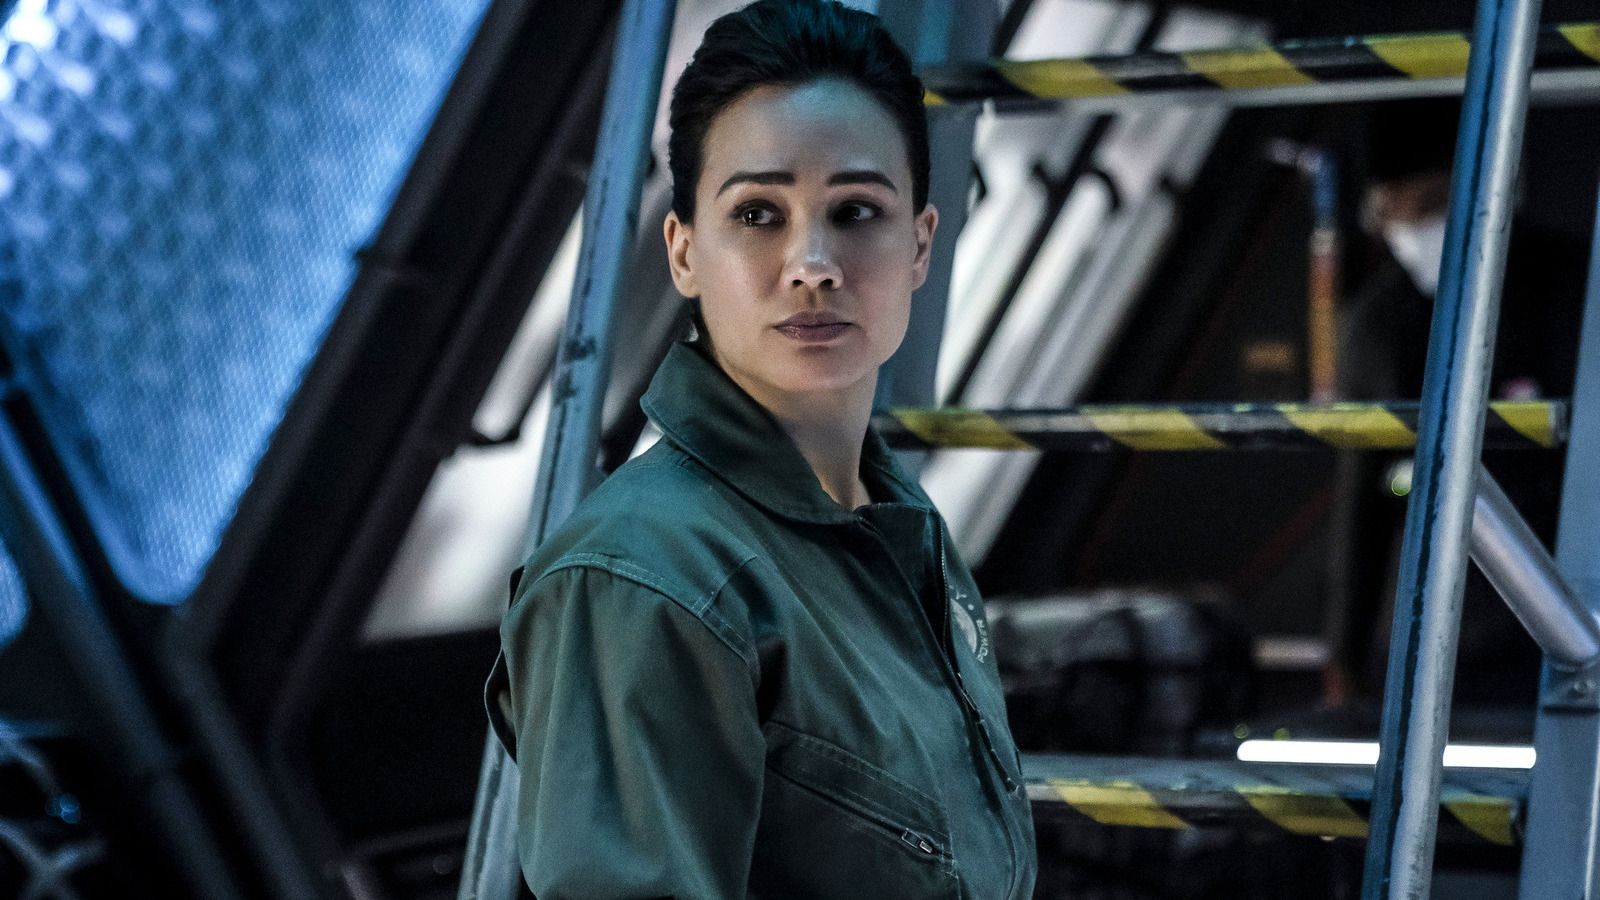 The Expanse Cast Wallpapers